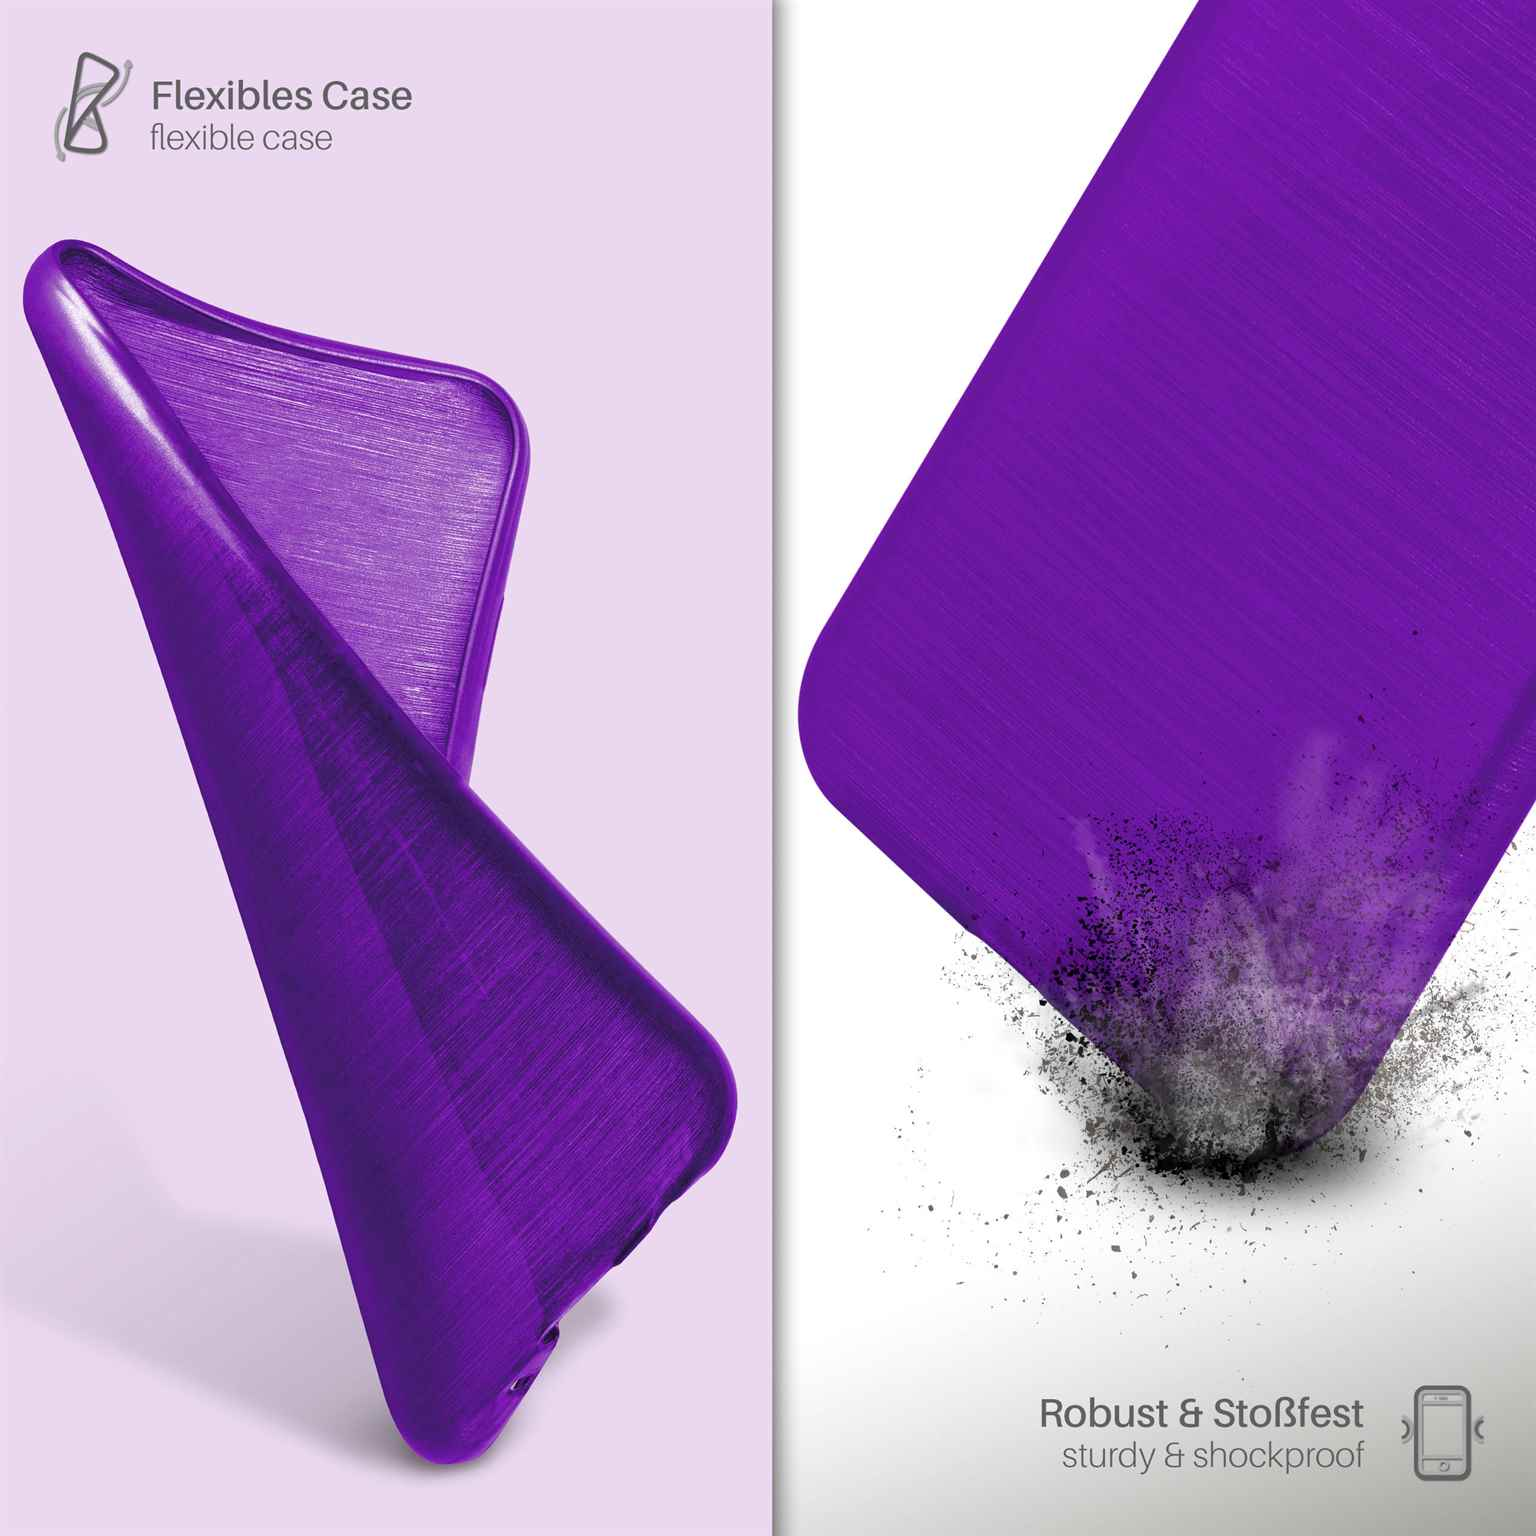 MOEX Brushed Case, Backcover, Purpure-Purple HTC, One M8s